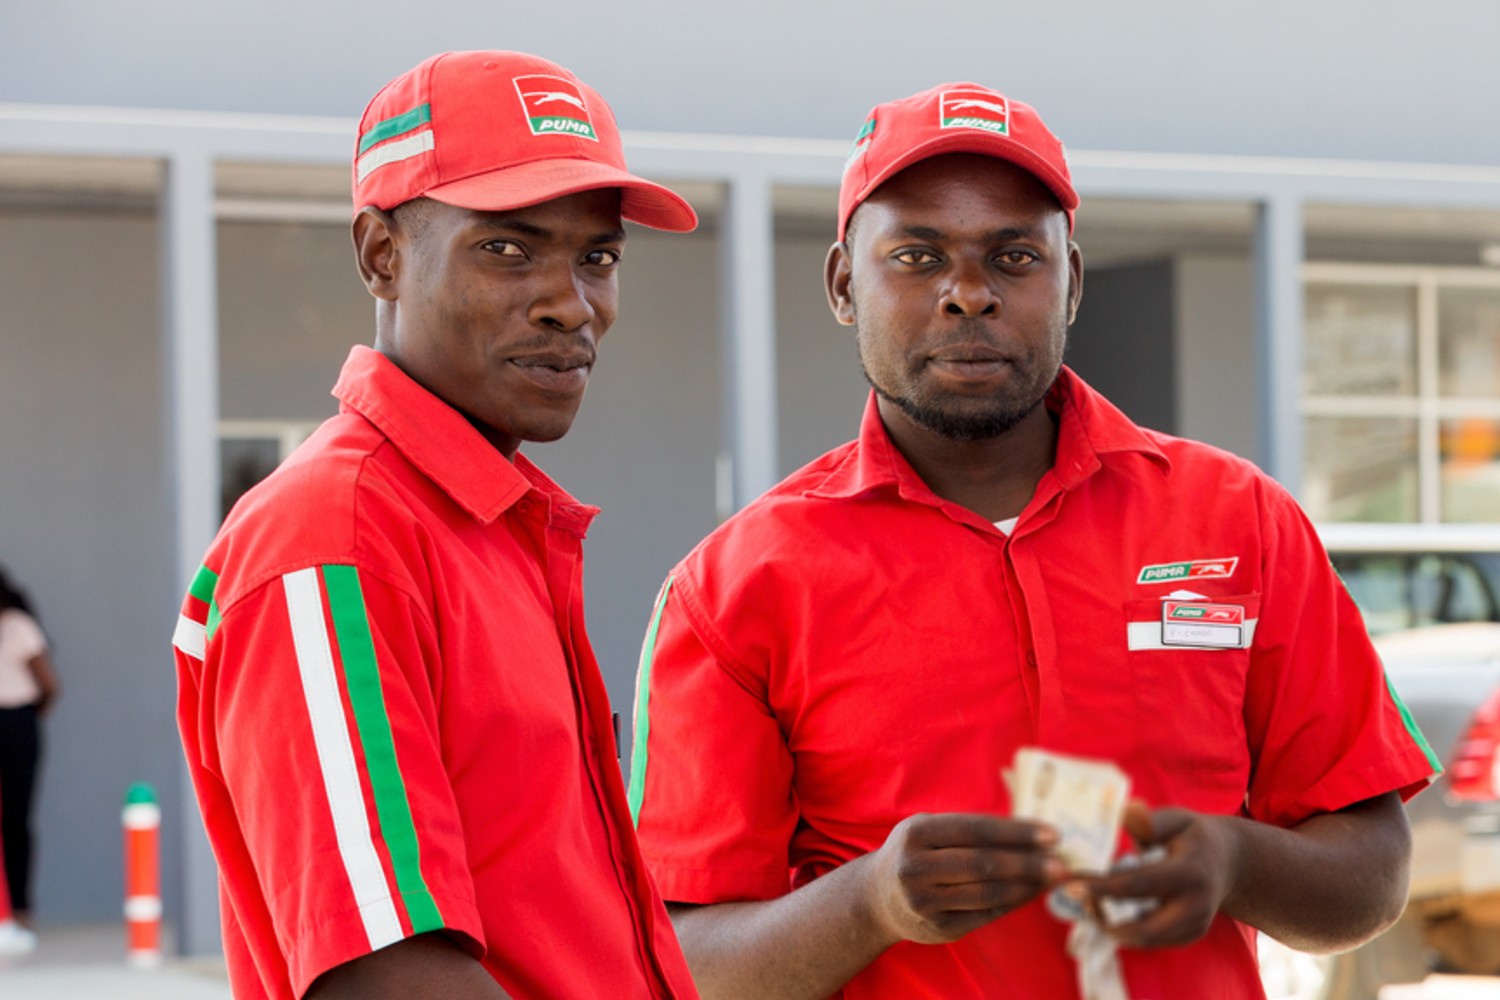 Puma Energy Zimbabwe Plans To "Solarize" 17 Fuel Service Stations In 2023